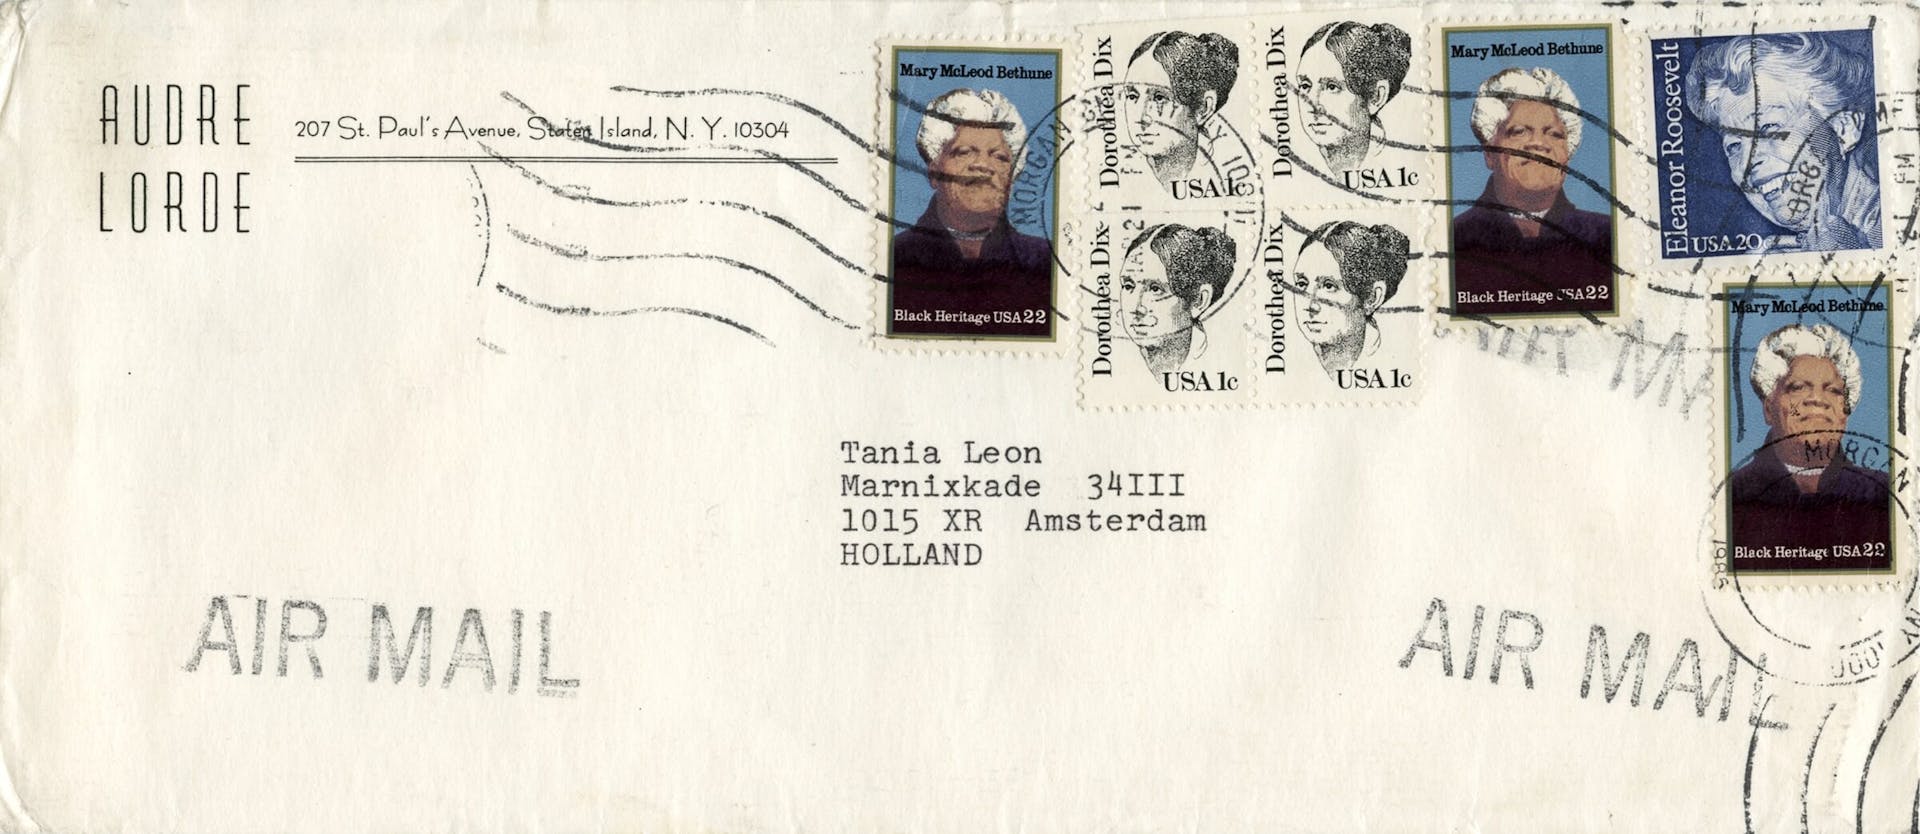 Envelope of a typed letter from the American writer Audre Lorde to Tania Leon, member of the Amsterdam based group “Sister Outsider”, 1986. Source: Archive Tania Leon, Collection IAV-Atria 